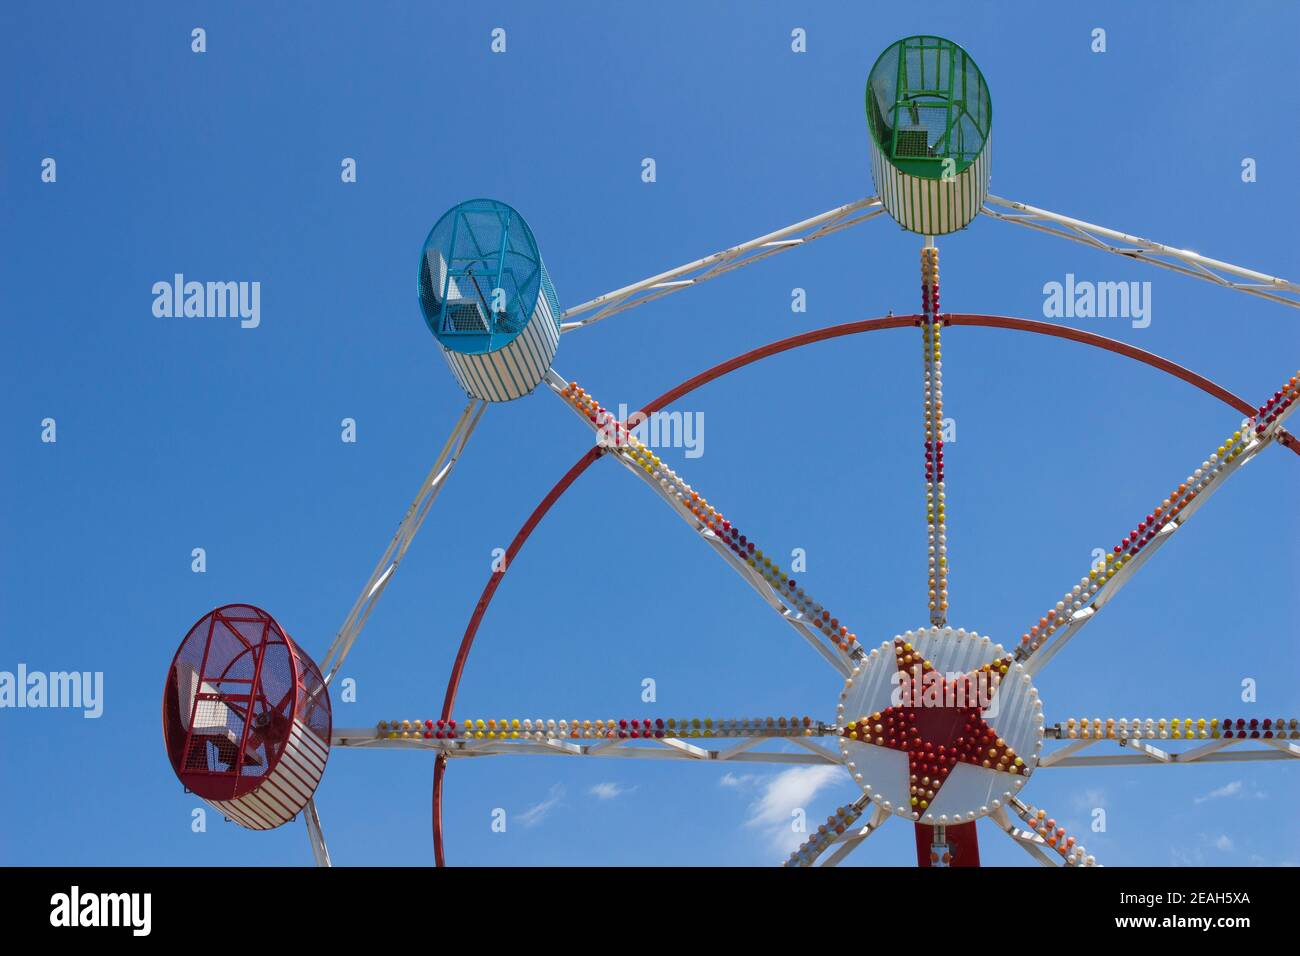 Big Wheel with three seats on blue sky summer day at an amusement park. Stock Photo